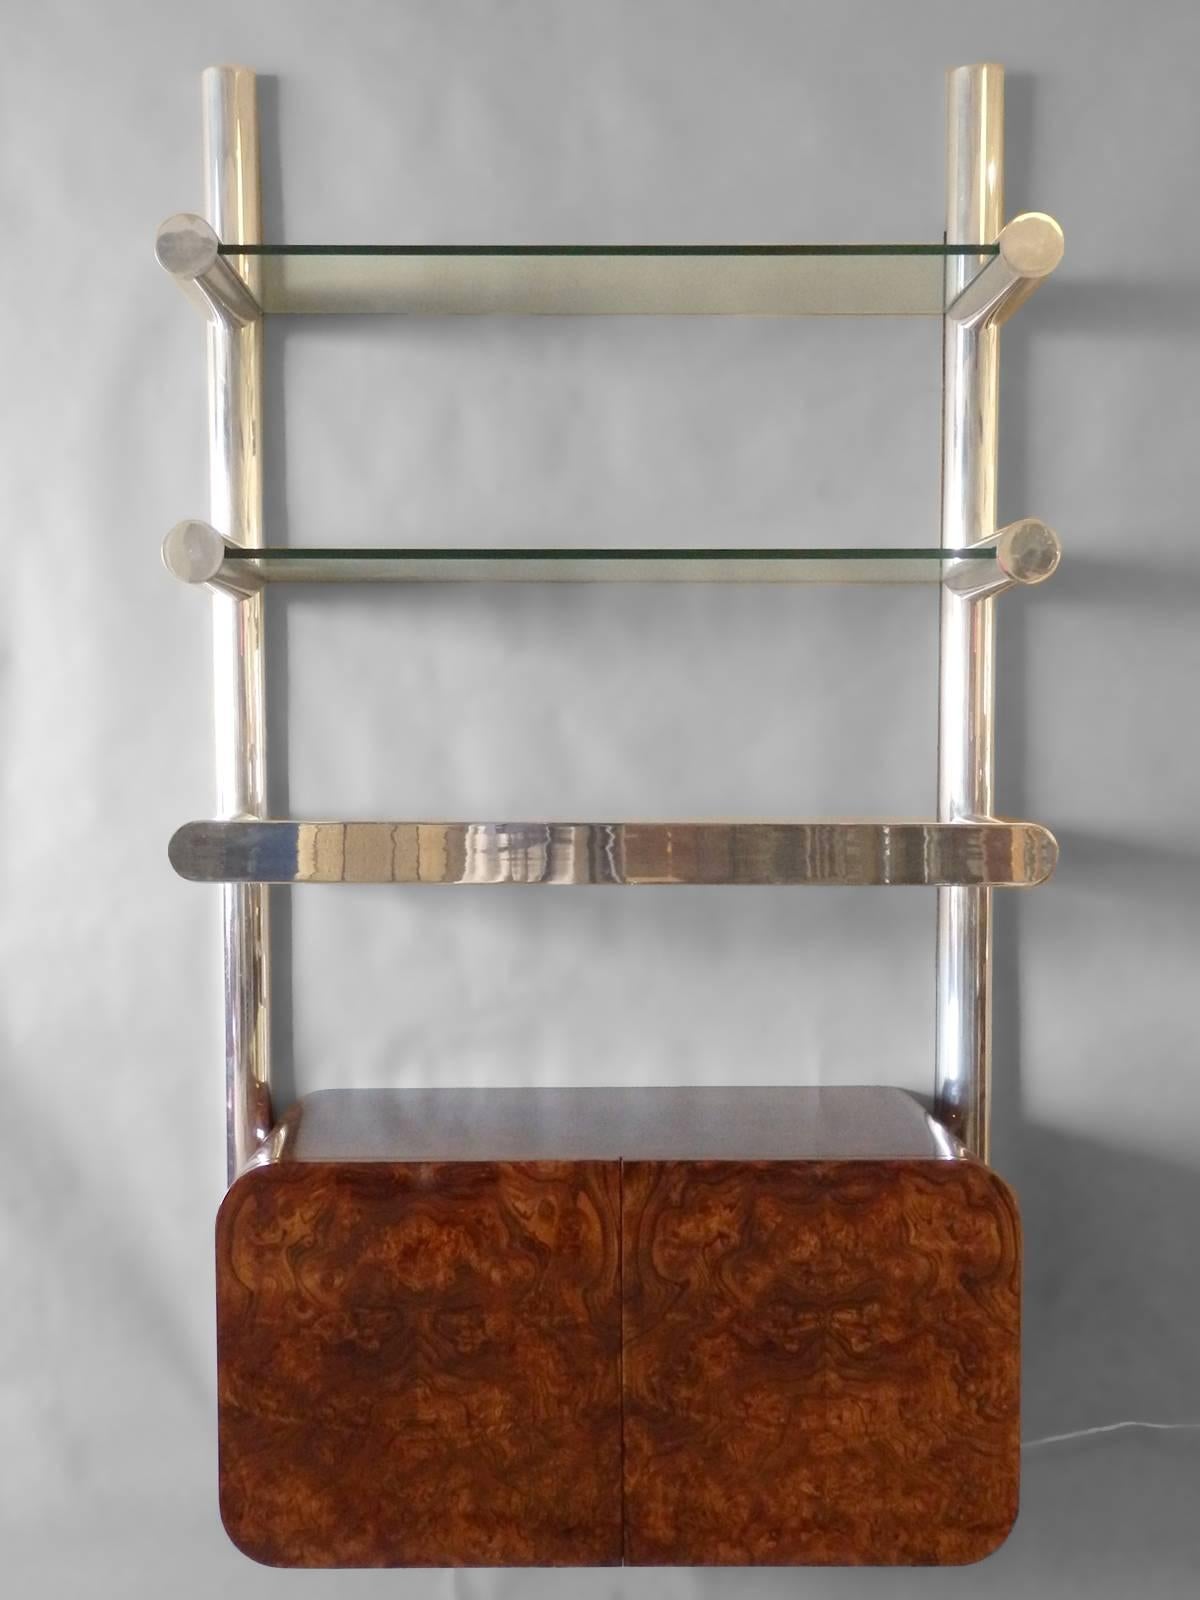 Janet Schweitzer for Pace.
Measures: 42 wide x 12.5 deep x 72 tall uprights.
Cabinet: 36 wide x 18 deep x 18 tall.
Aluminium vertical brackets are 6' tall (shown), 13.5